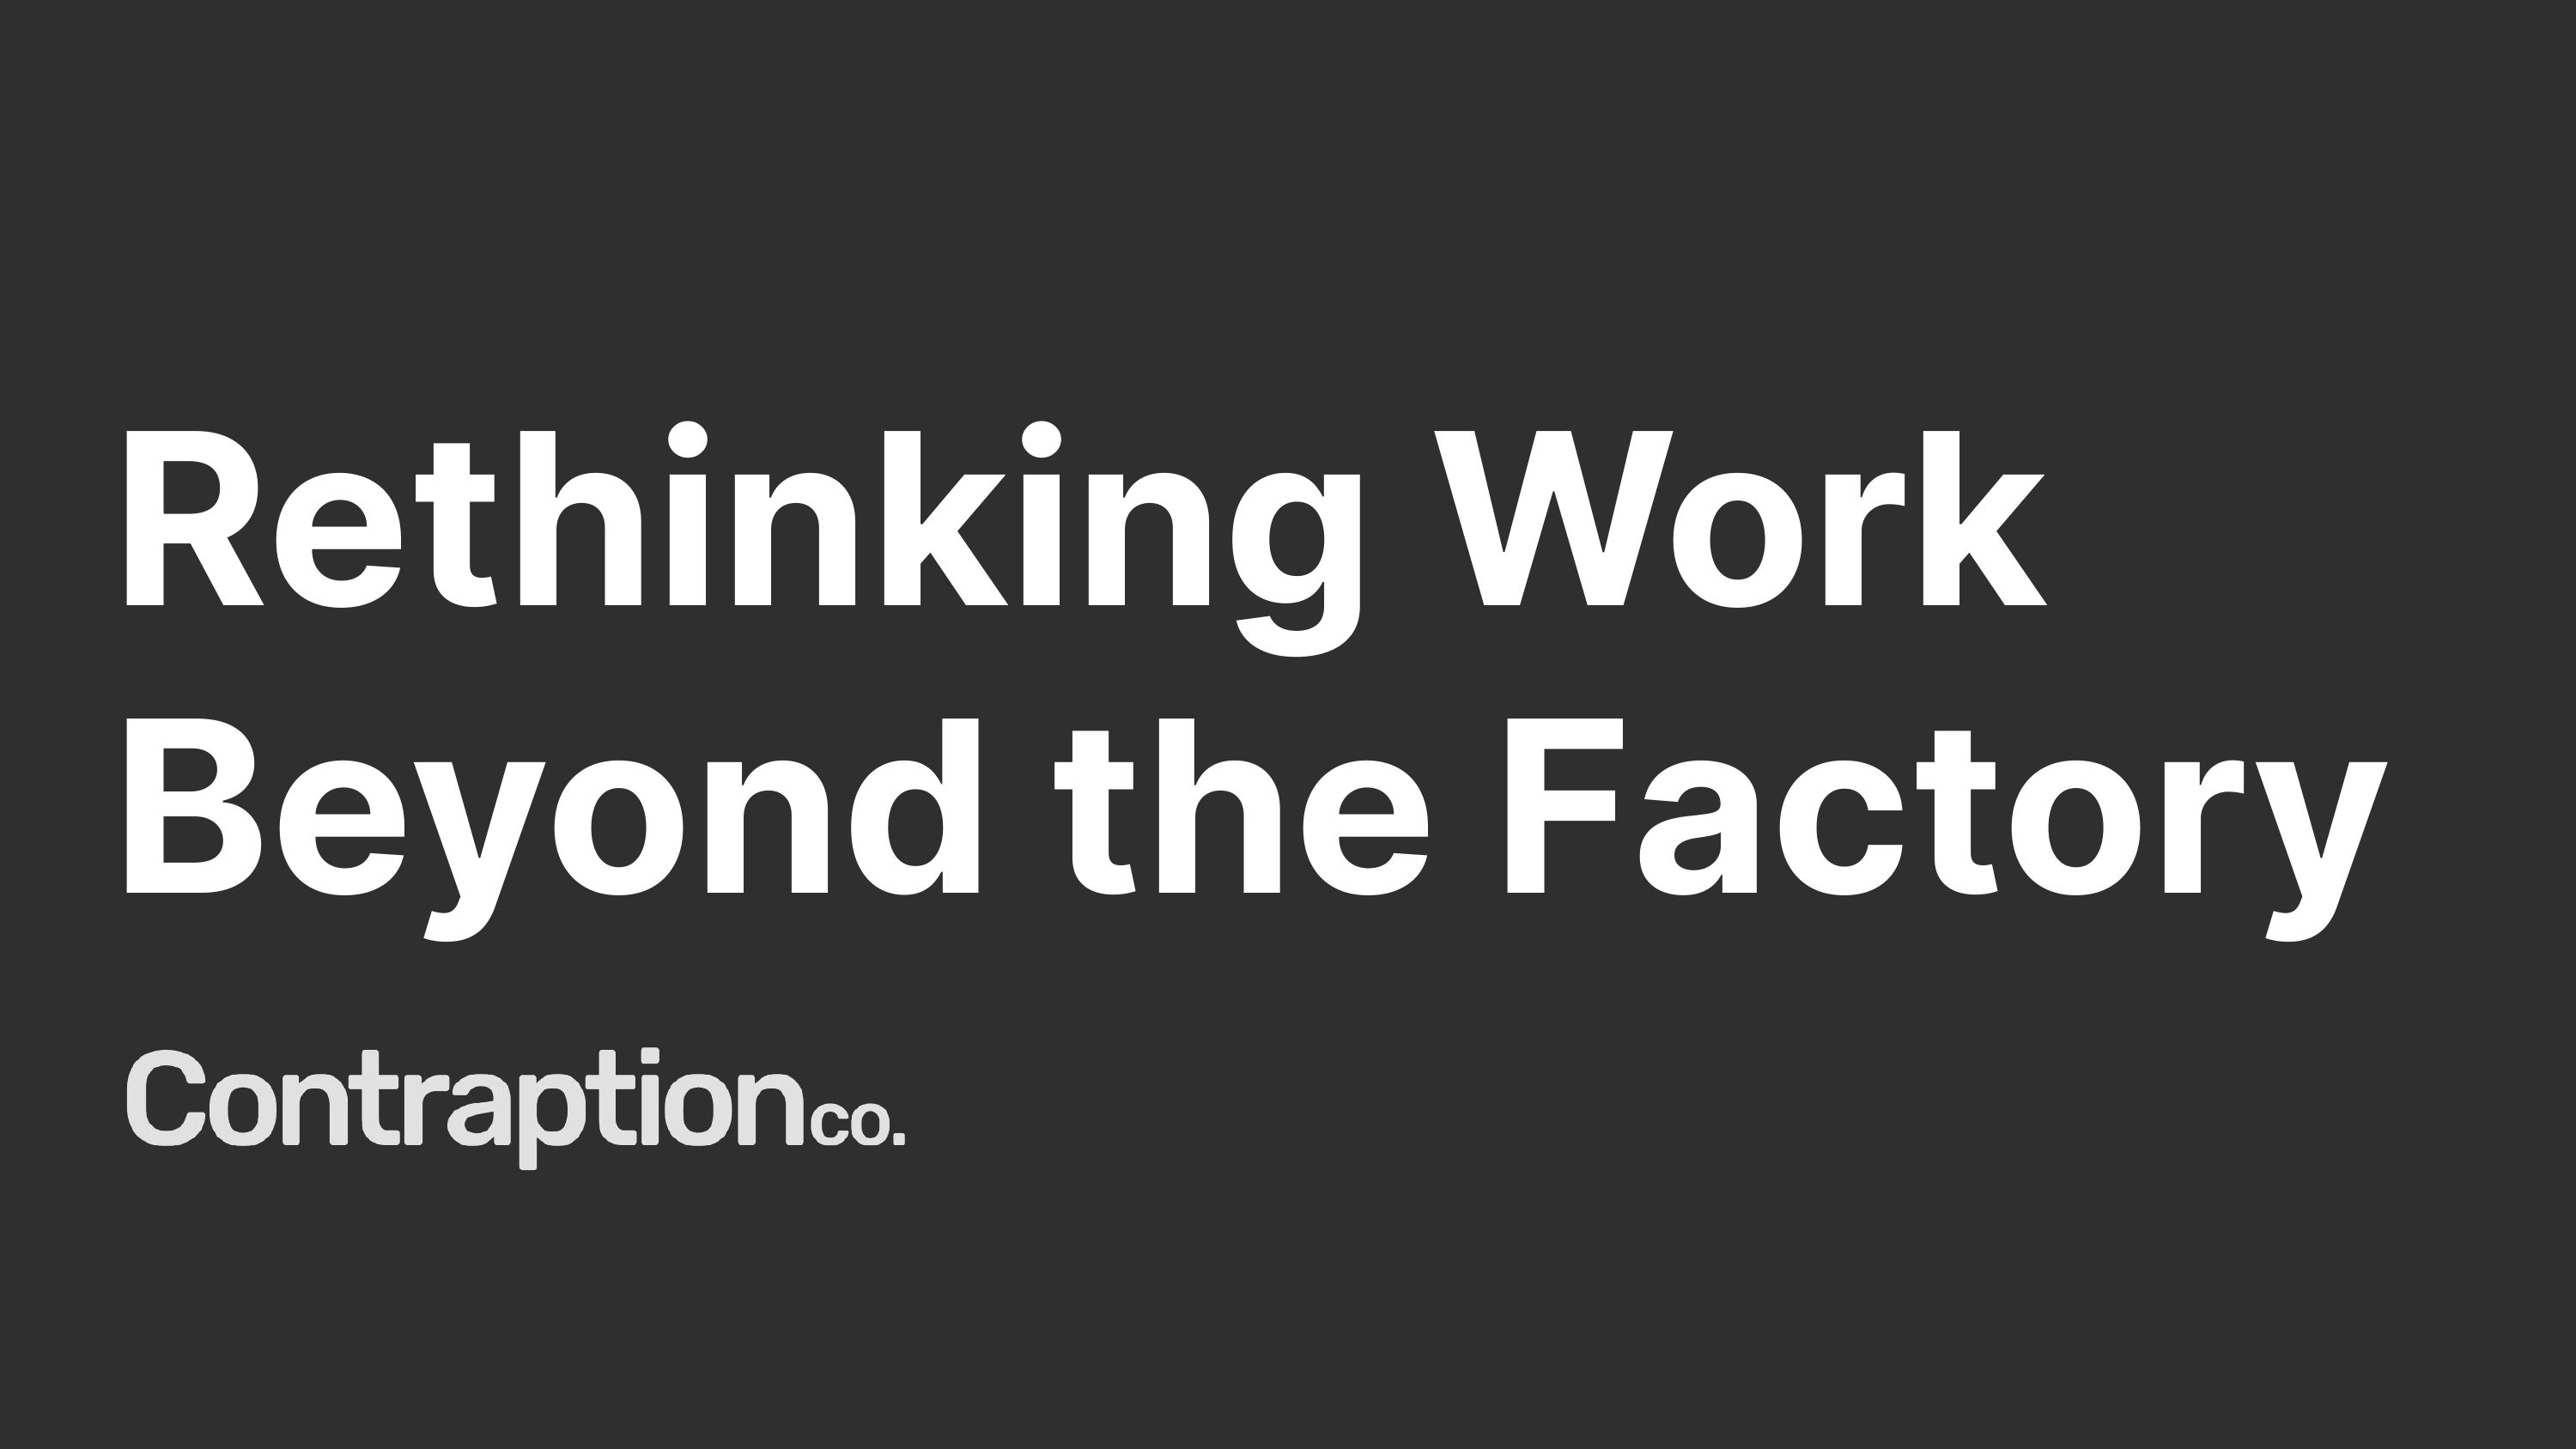 Thanks for joining my presentation, Rethinking Work Beyond the Factory, by Contraption Company.